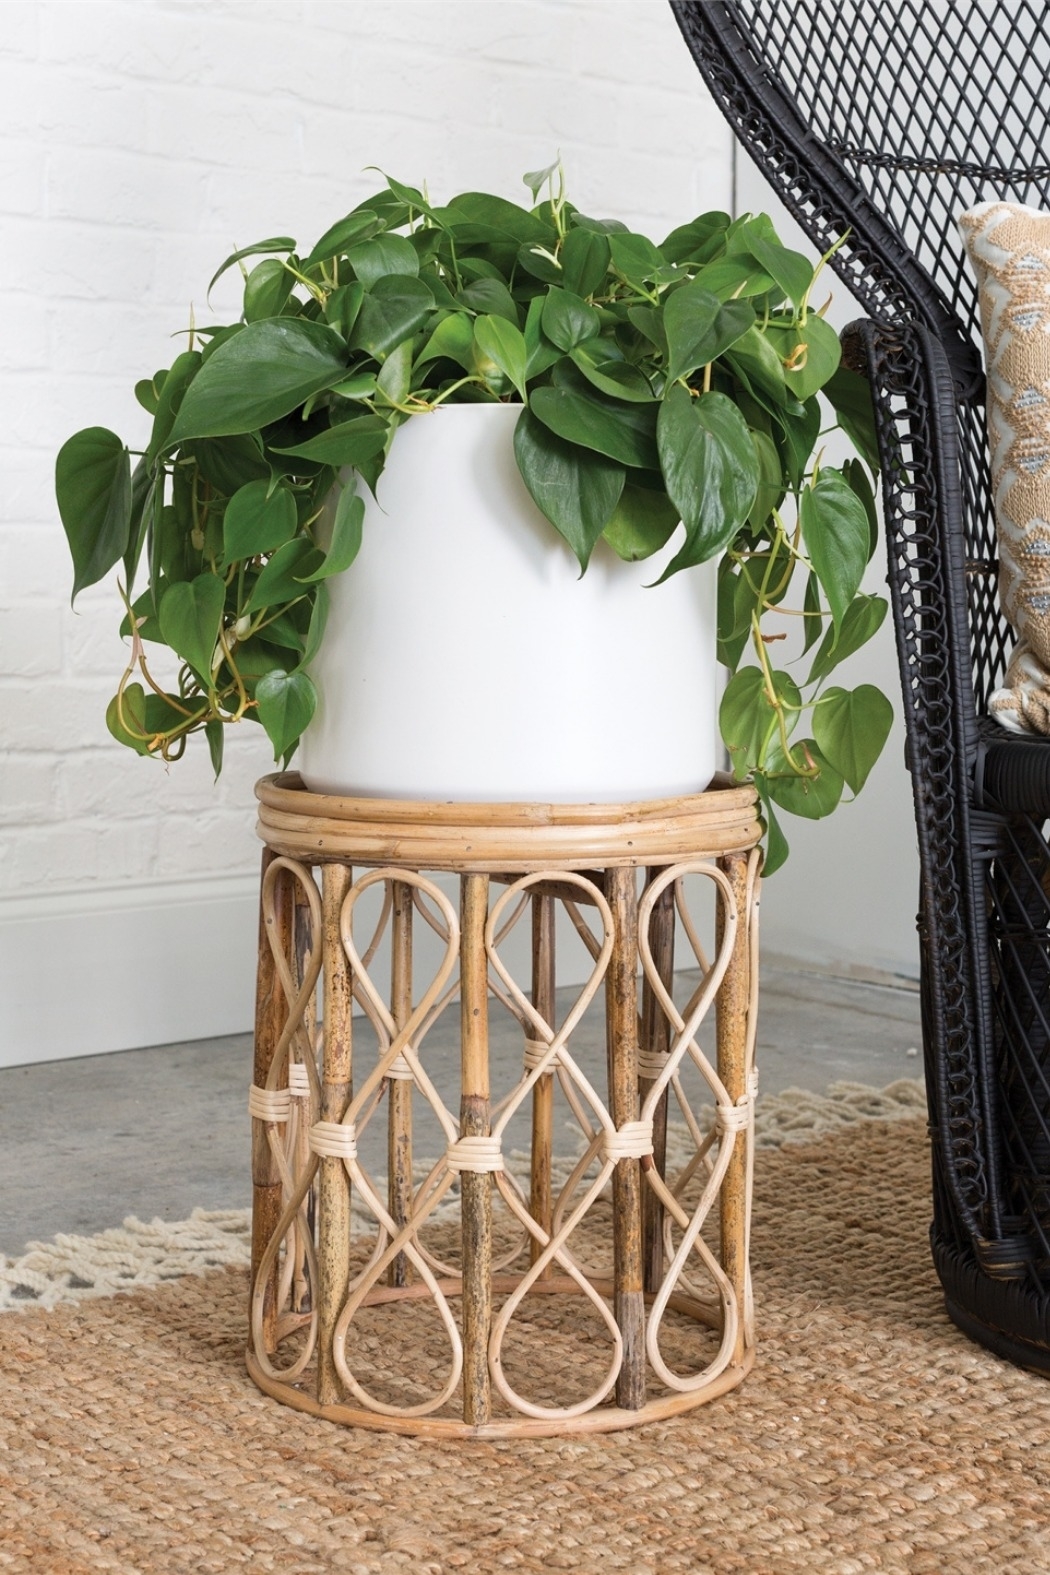 Potted plant atop a bamboo stand, suitable for home decor, featured in a shopping article